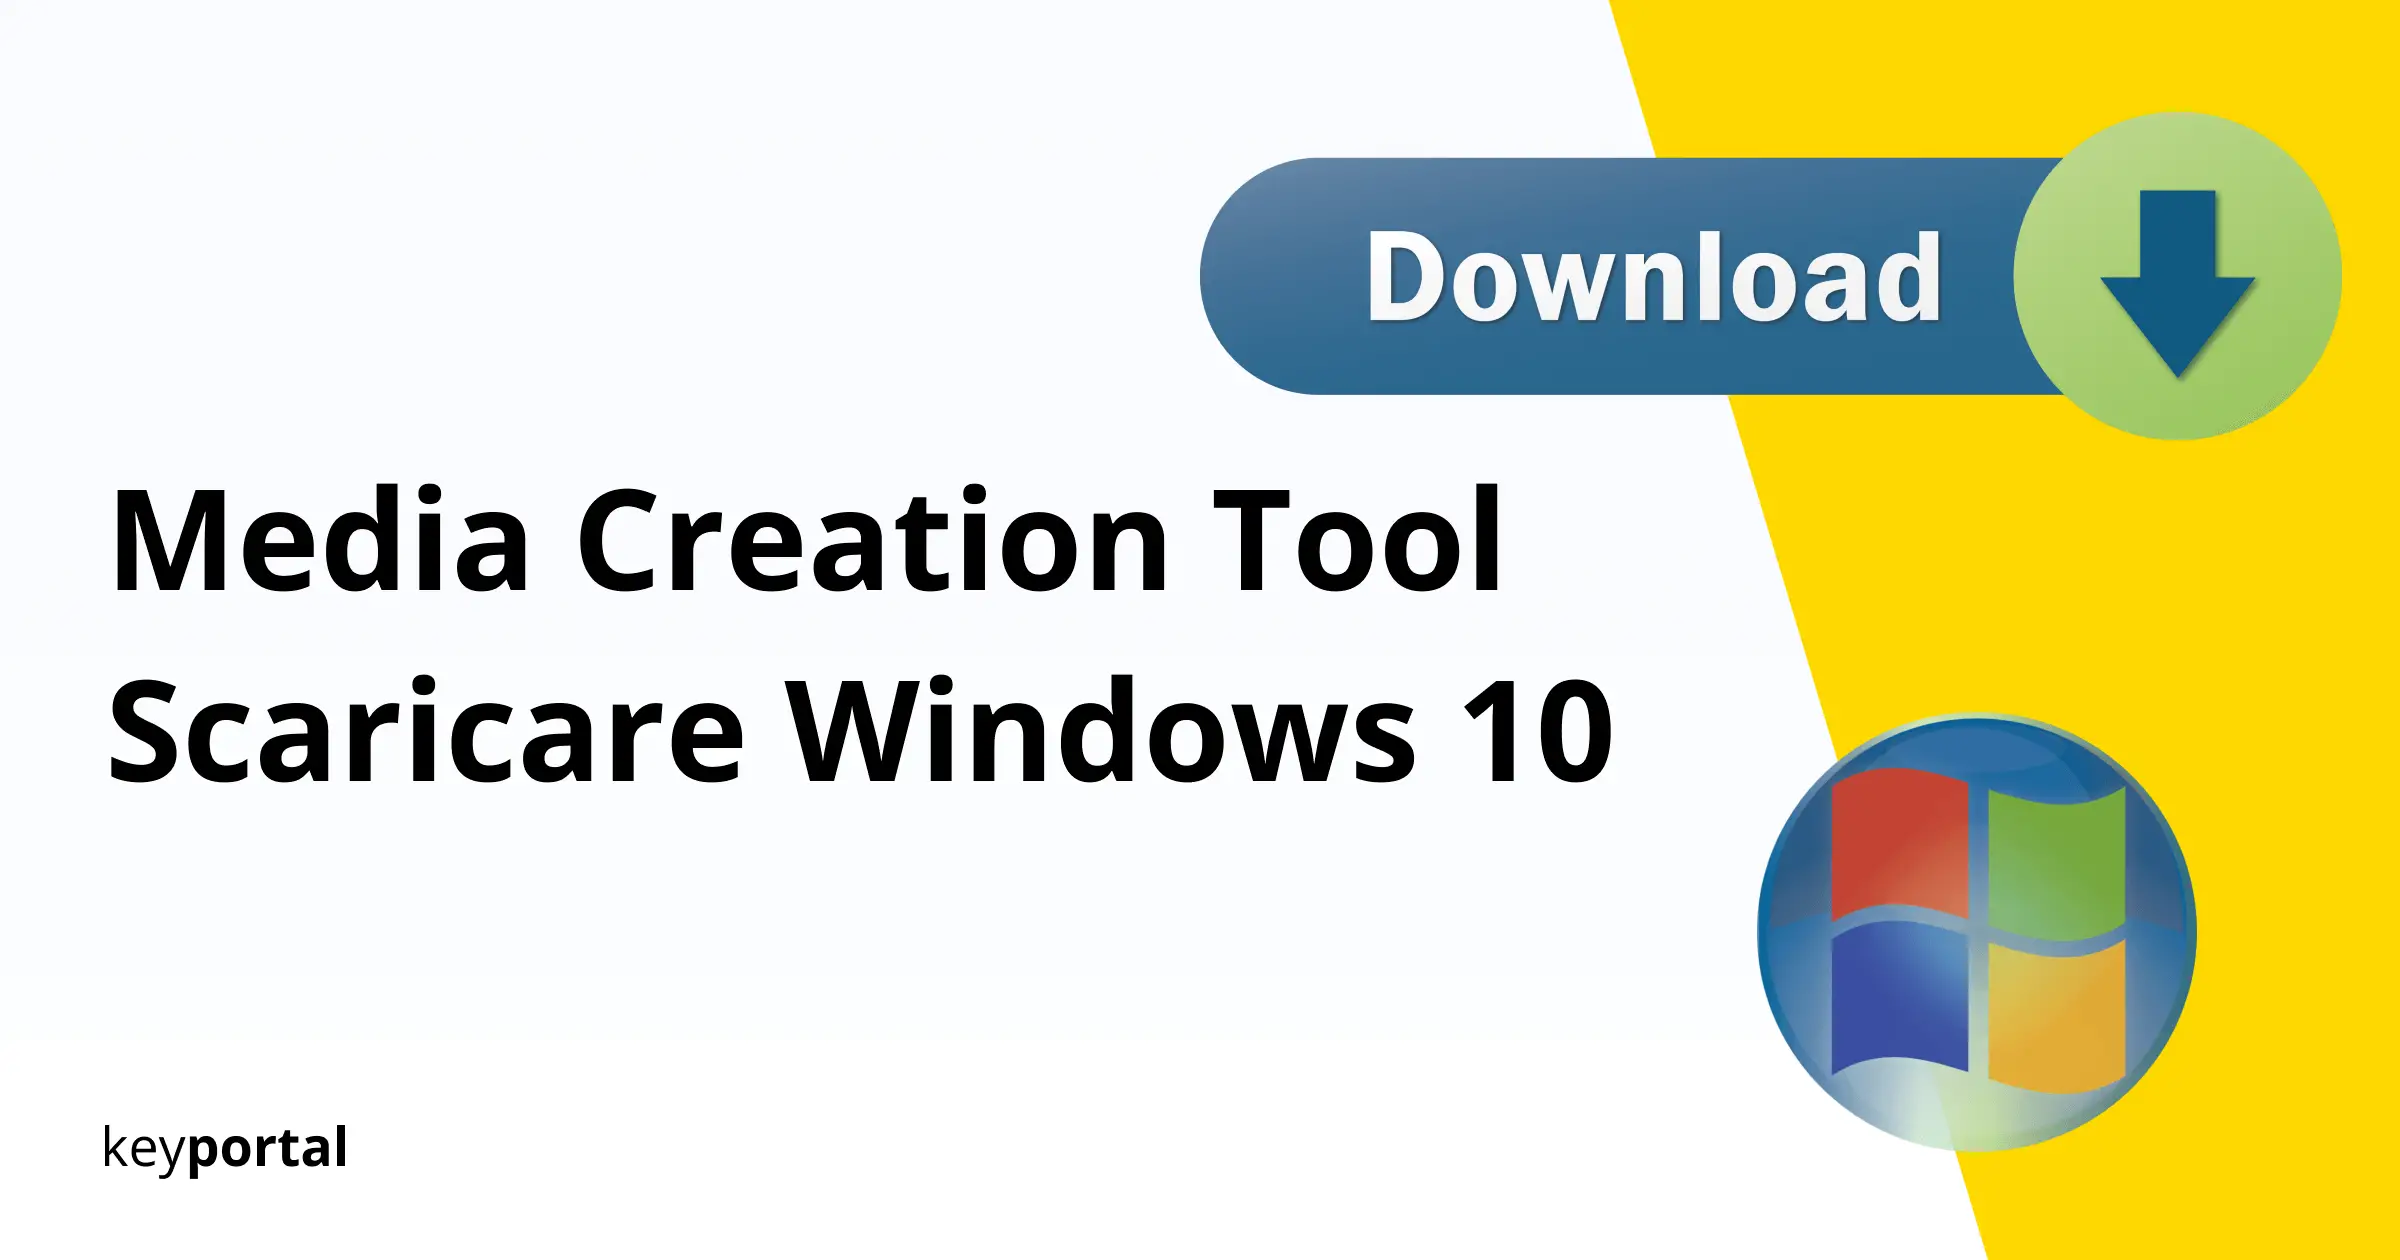 media creation tool to download windows 10 pro